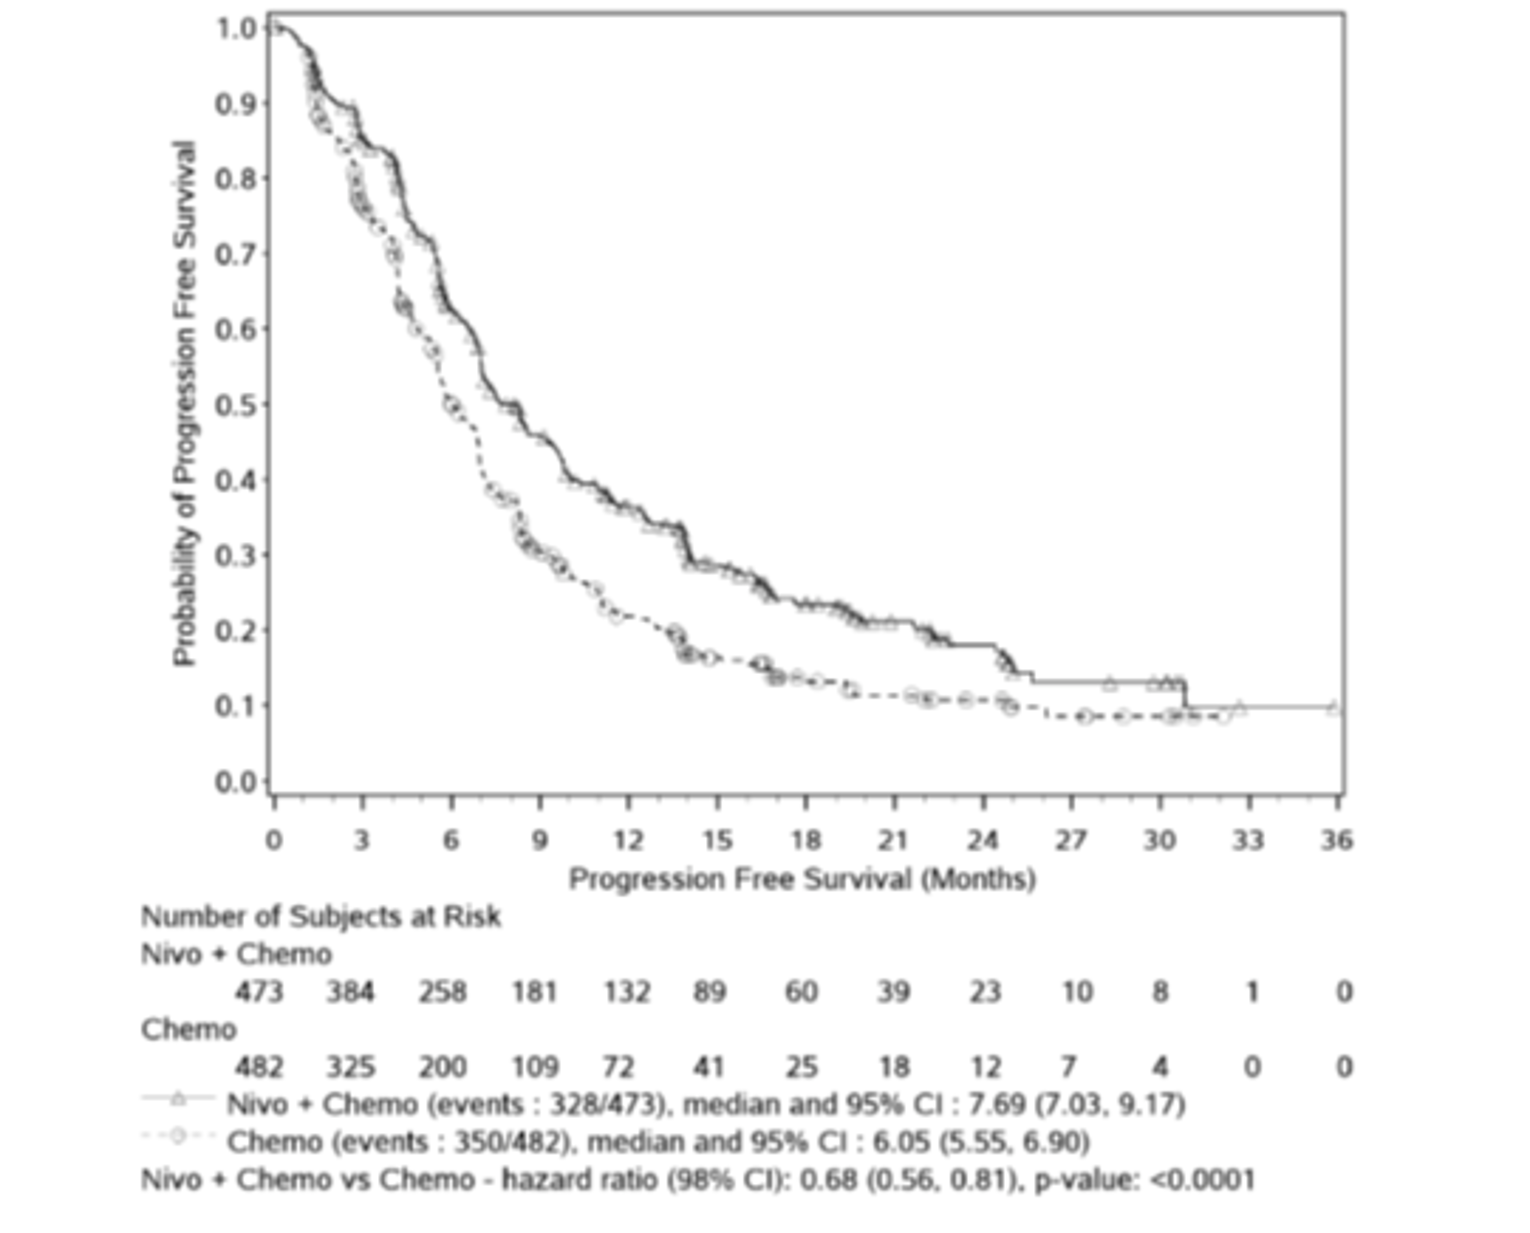 In this Kaplan-Meier analysis of PFS among patients with PD-L1 CPS ≥ 5 in the CheckMate-649 trial, approximately 50% of patients receiving chemotherapy had progressed or died by 6 months, approximately 75% had progressed or died by 10 months, and approximately 90% had progressed or died by 24 months. In contrast, approximately 50%, 75%, and 90% of patients receiving nivolumab plus chemotherapy had progressed or died by 8 months, 18 months, and 30 months, respectively. Median PFS was 7.69 (95% CI, 7.03 to 9.17) months among patients receiving nivolumab plus chemotherapy and 6.05 (95% CI, 5.55 to 6.90) months among patients receiving chemotherapy. The number of at-risk patients receiving nivolumab plus chemotherapy at 0, 3, 6, 9, 12, 15, 18, 21, 24, 27, 30, 33, and 36 months was 473, 384, 258, 181, 132, 89, 60, 39, 23, 10, 8, 1, and 0, respectively. The number of at-risk patients receiving chemotherapy at 0, 3, 6, 9, 12, 15, 18, 21, 24, 27, 30, 33, and 36 months was 482, 325, 200, 109, 72, 41, 25, 18, 12, 7, 4, 0, and 0, respectively.